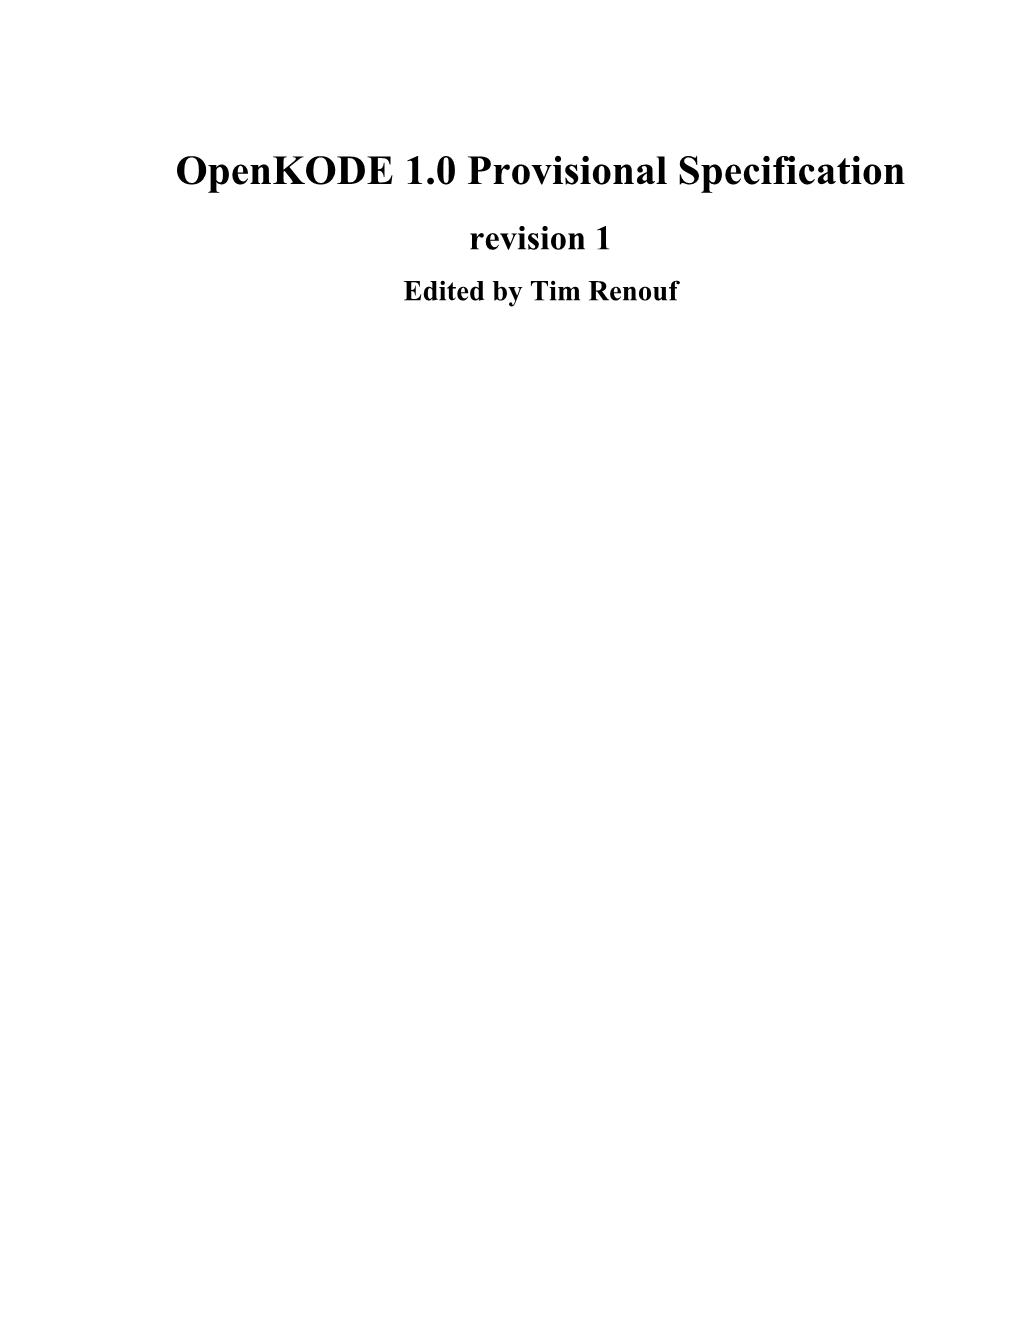 Openkode 1.0 Provisional Specification Revision 1 Edited by Tim Renouf Openkode 1.0 Provisional Specification: Revision 1